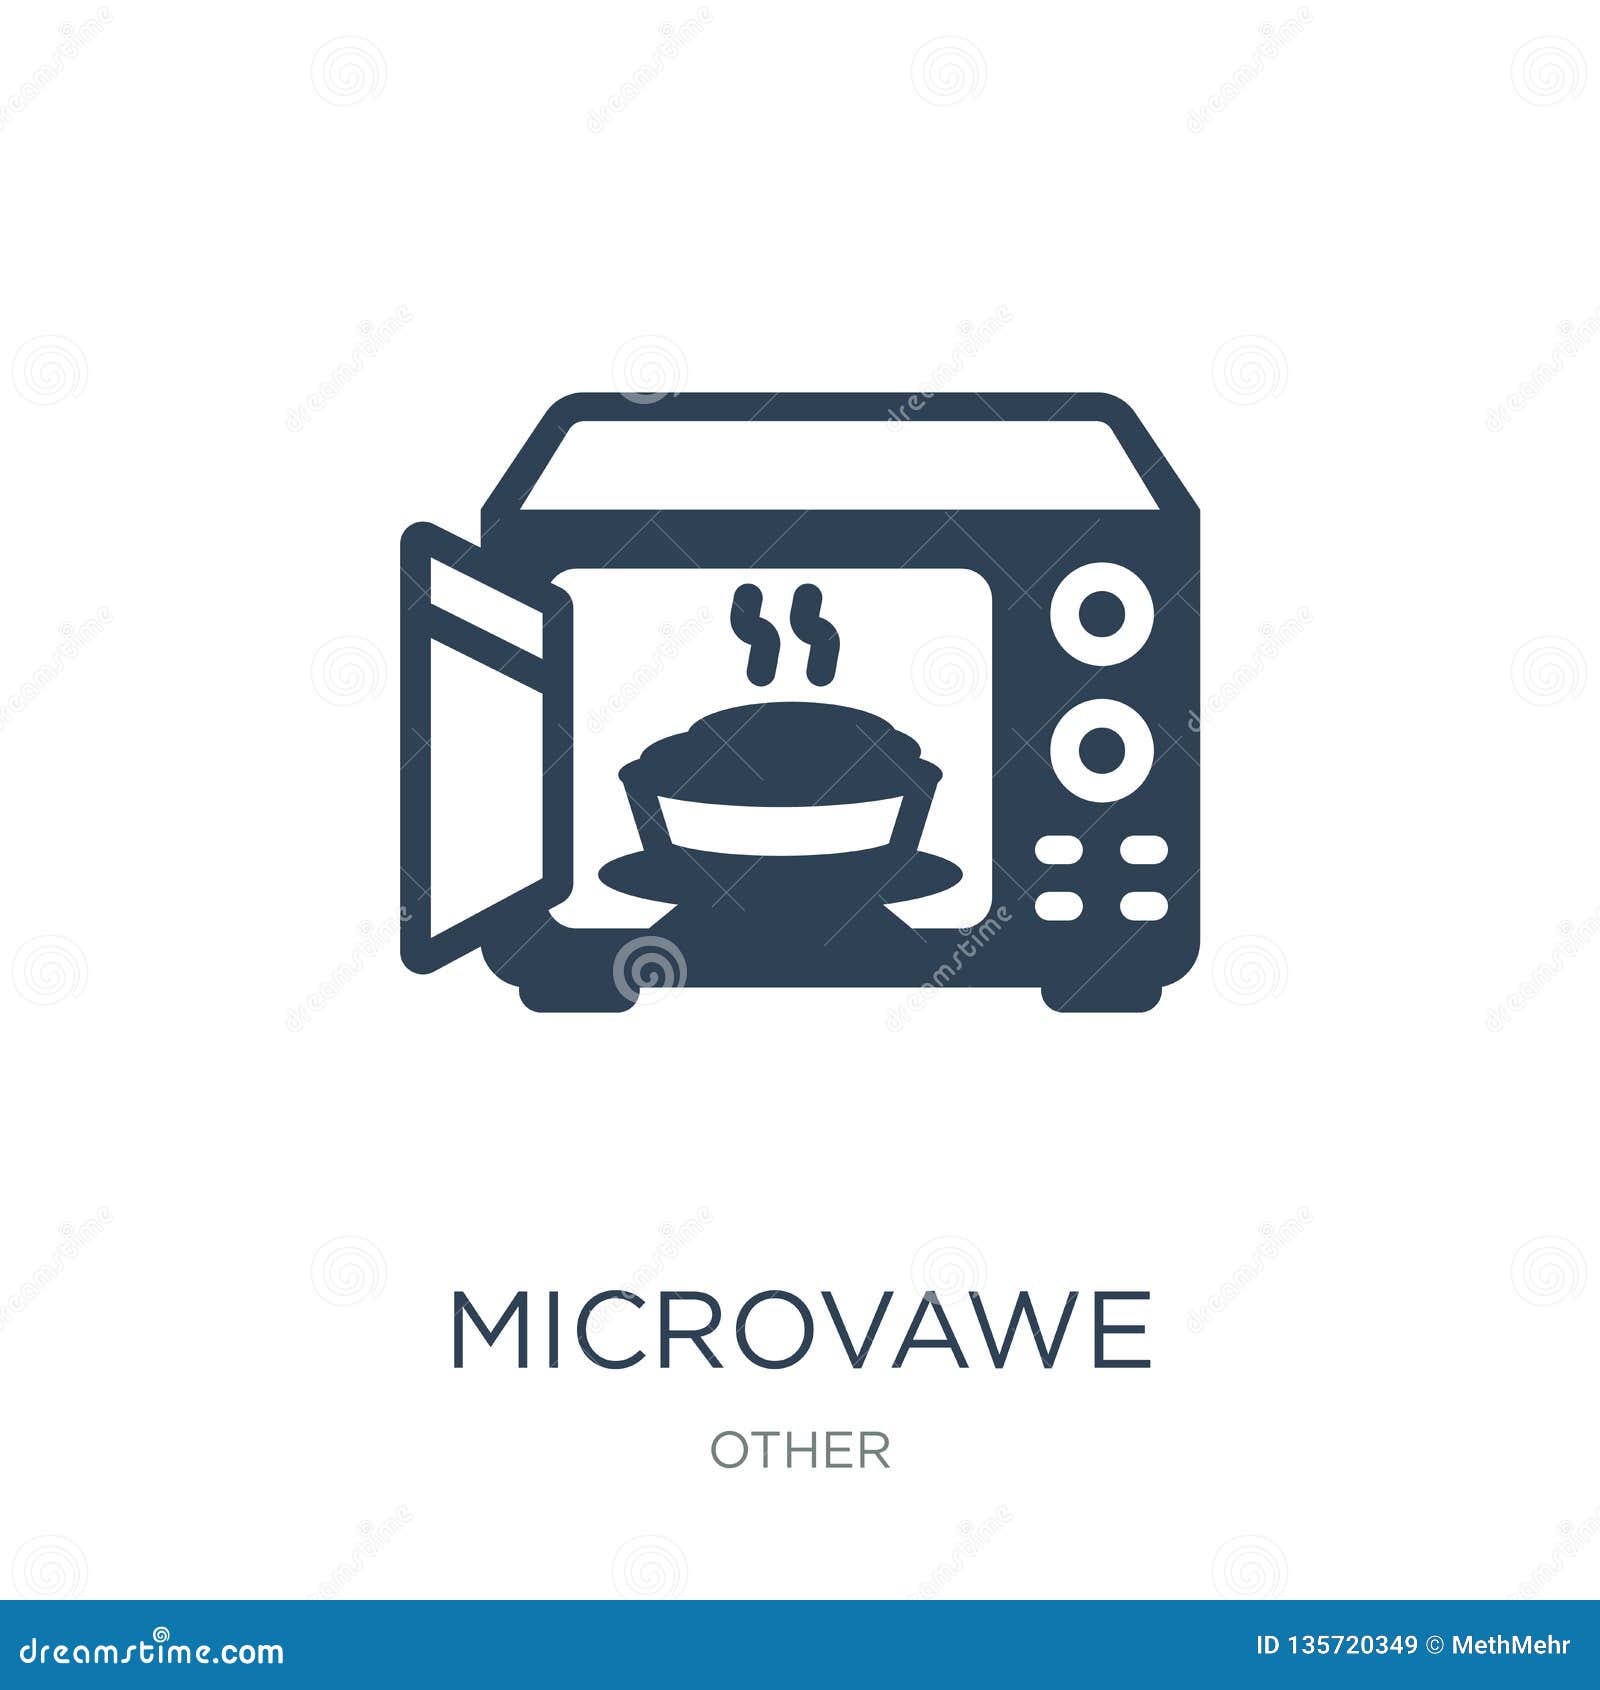 microvawe icon in trendy  style. microvawe icon  on white background. microvawe  icon simple and modern flat